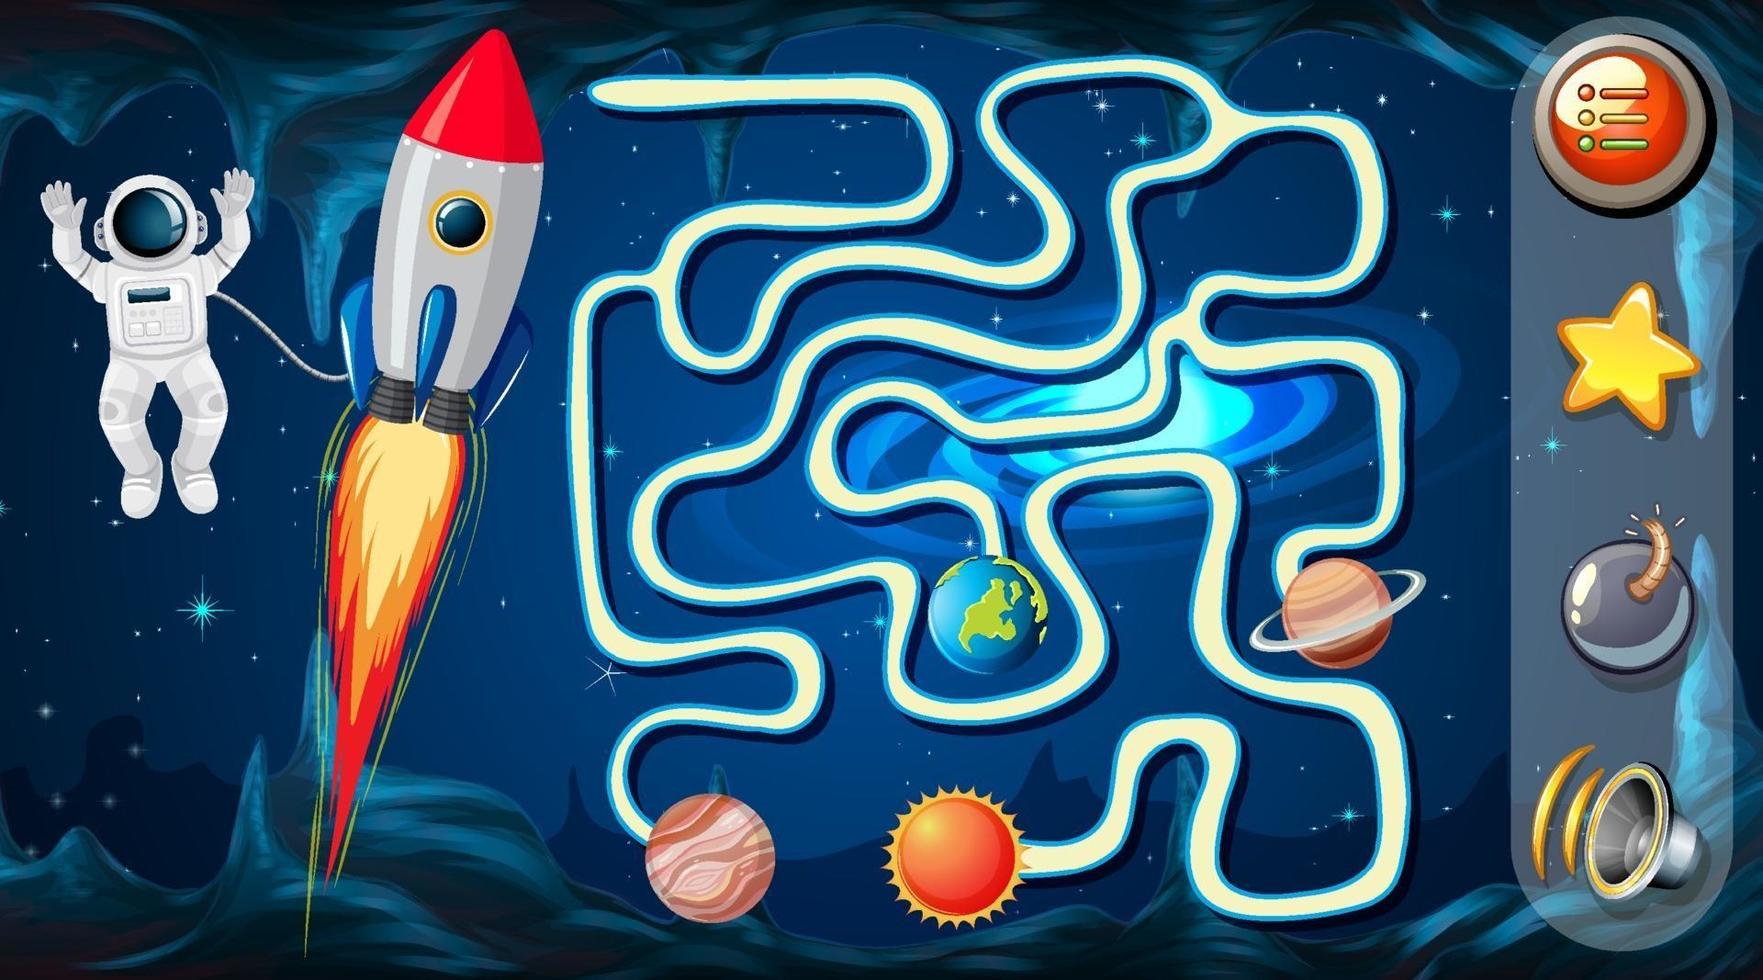 Maze game with space theme template vector